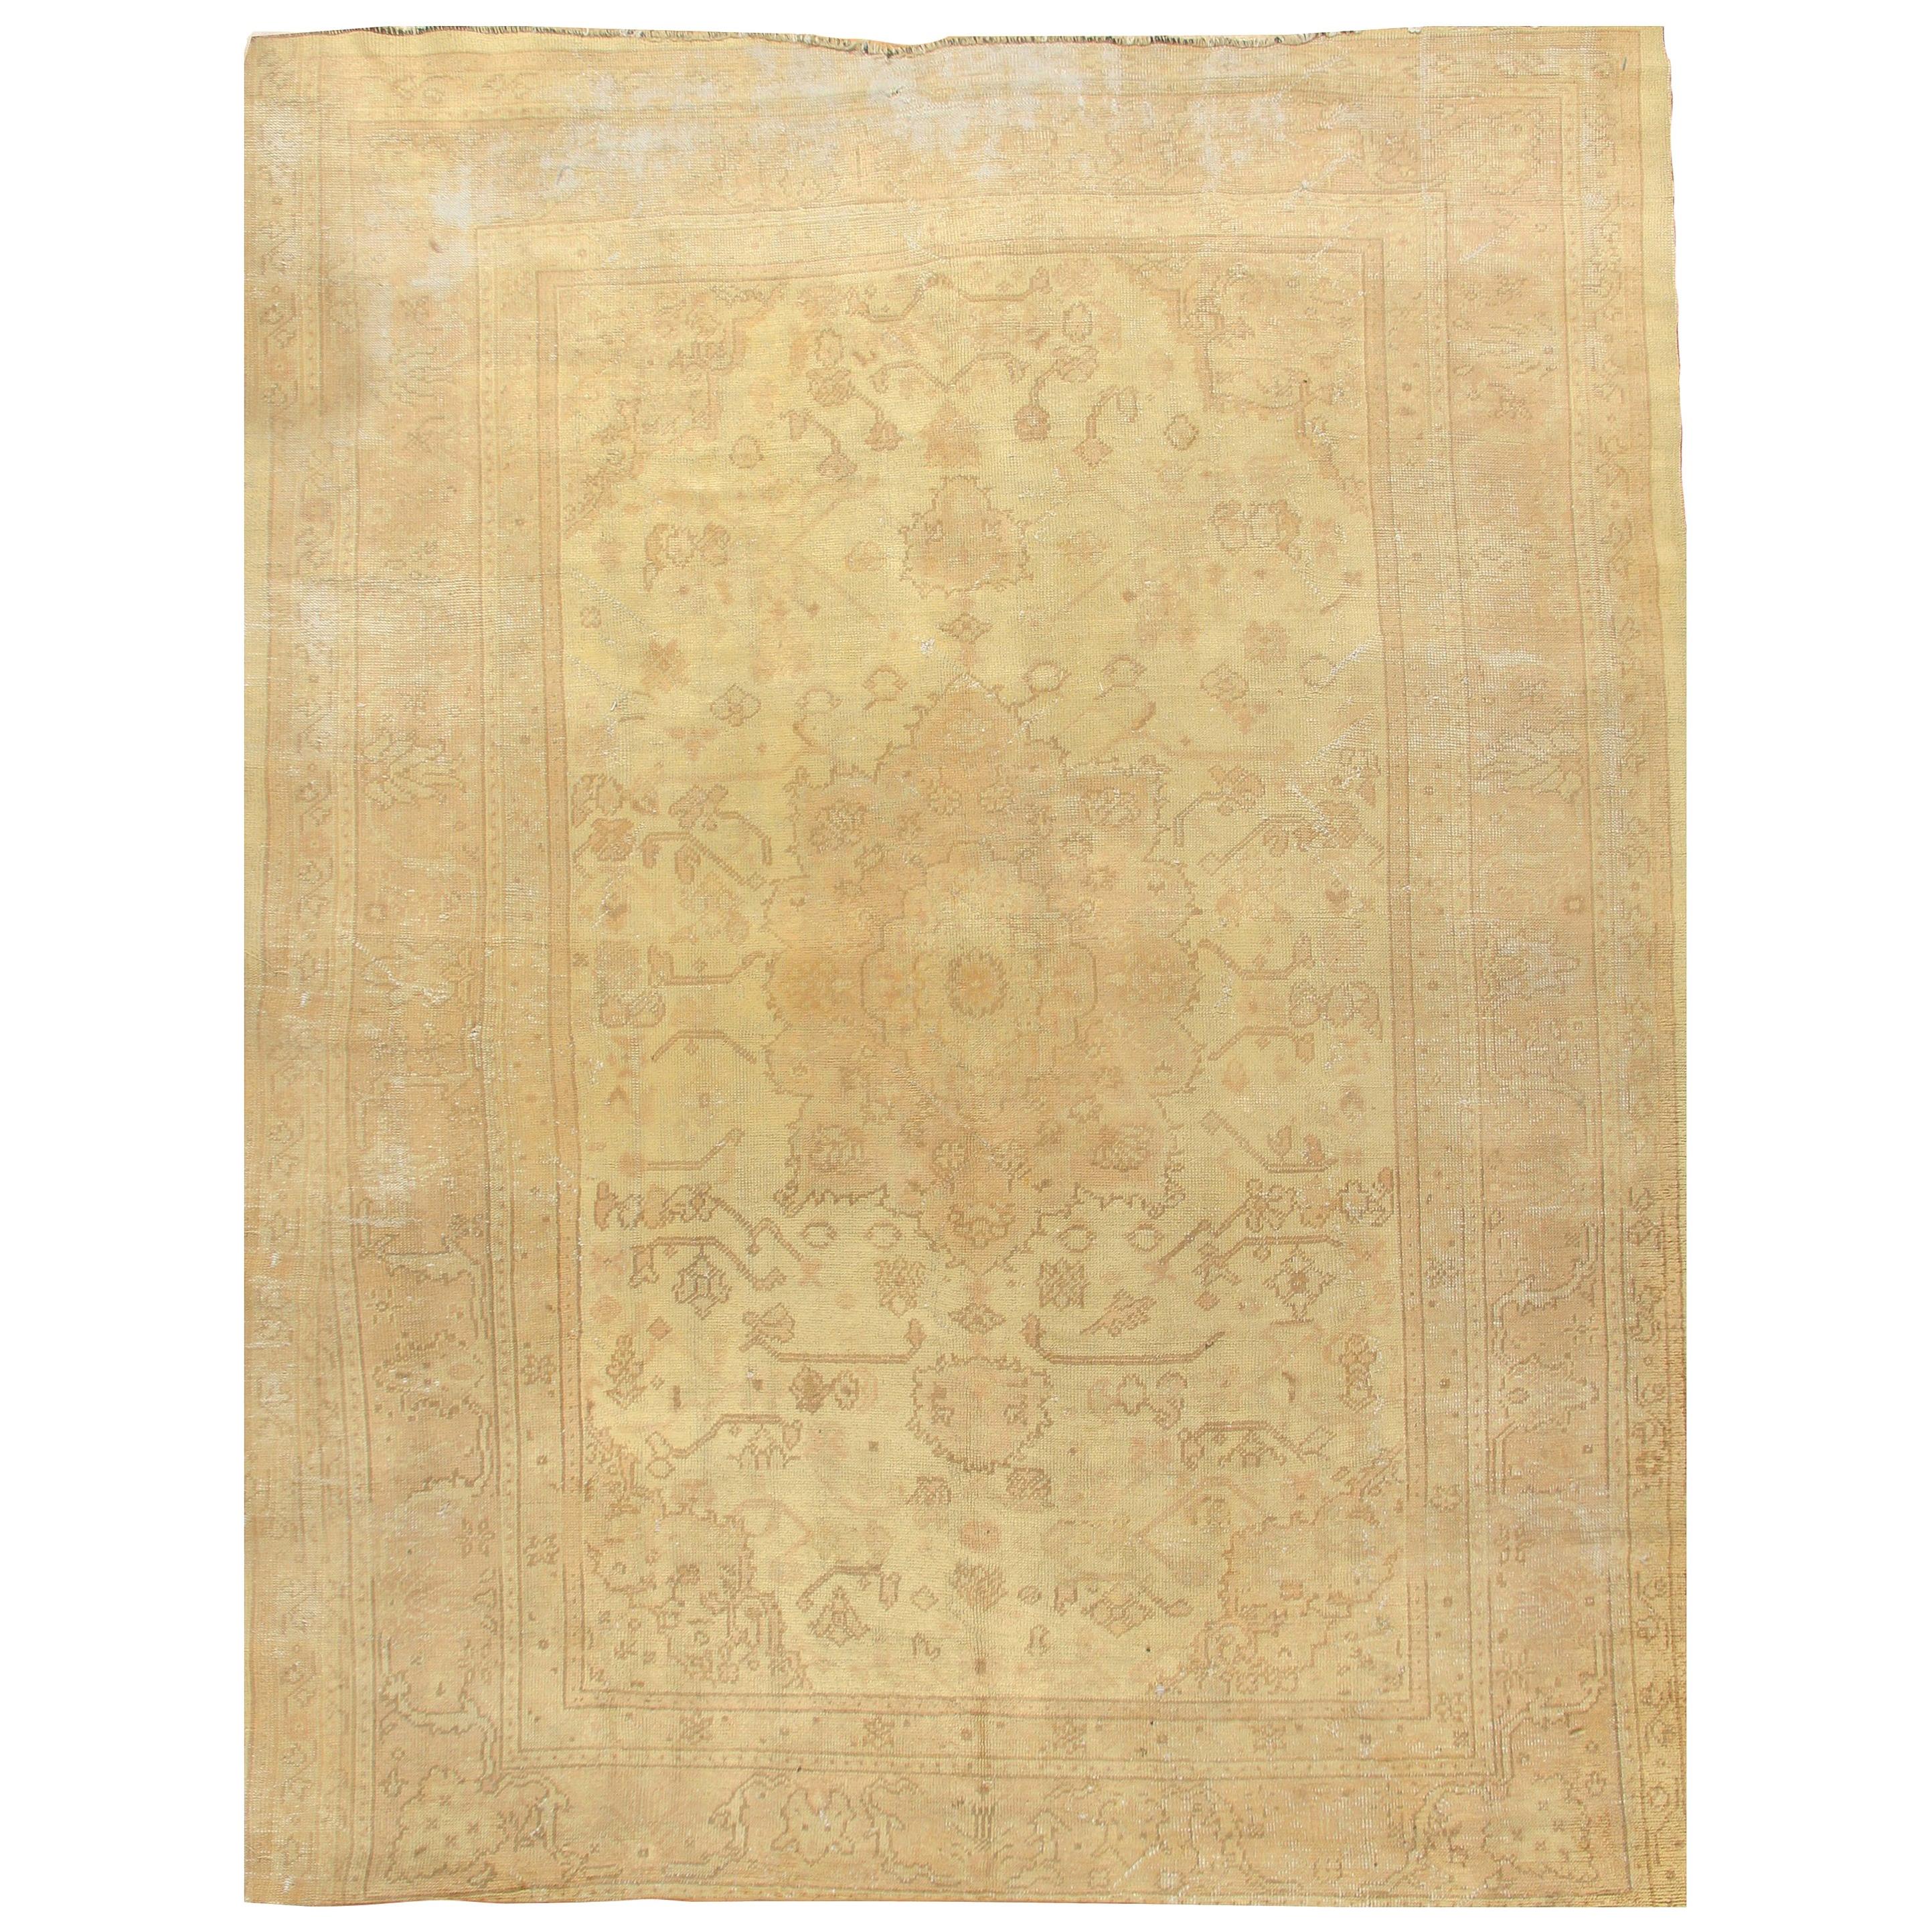 Antique Shabby Chic Oushak Rug, circa 1920 8'11 x 11'10 For Sale